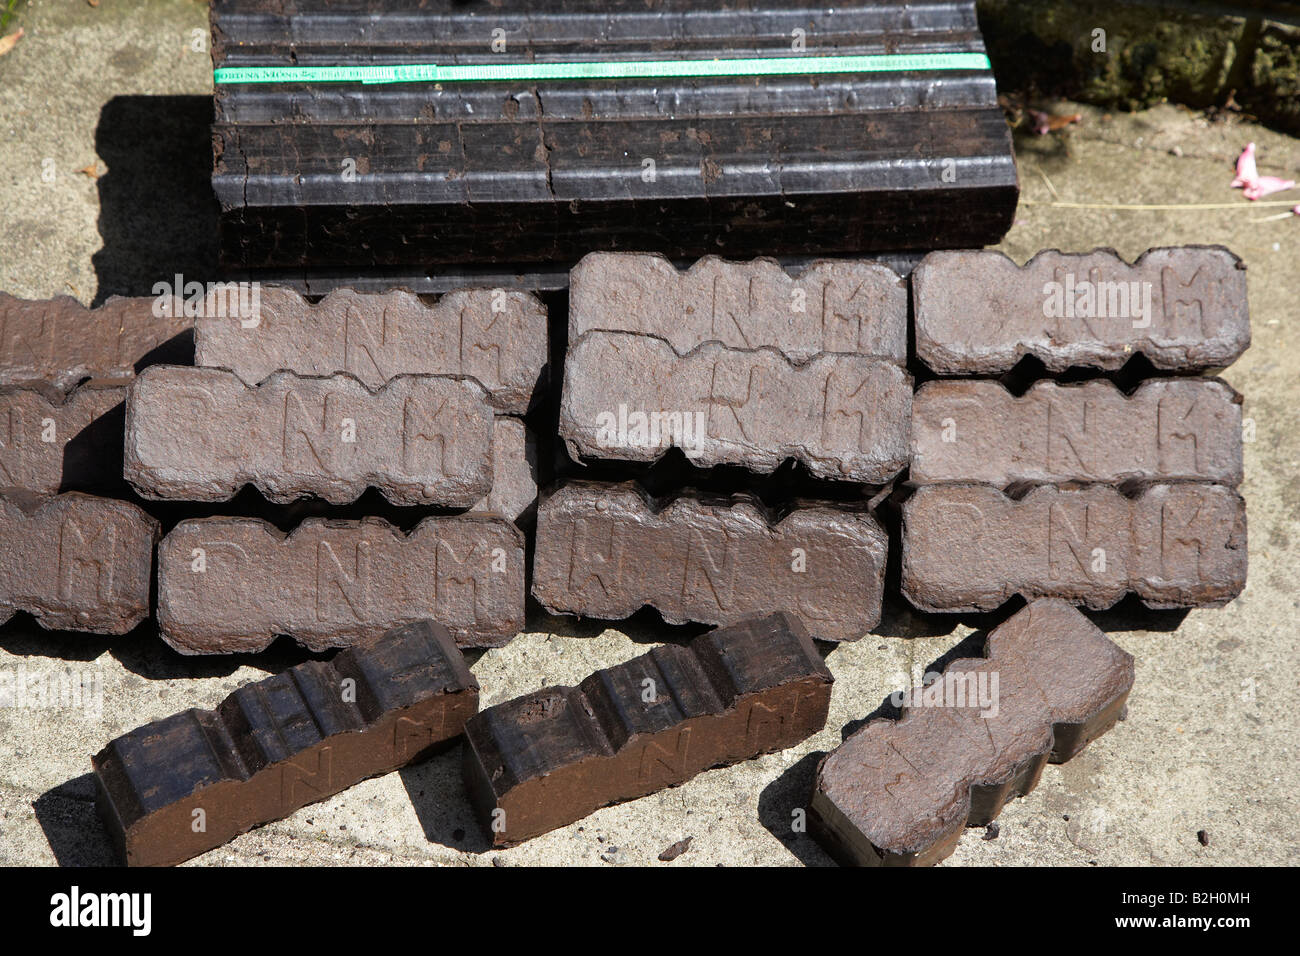 Peat Briquettes (bord na mona) Stacked and ready to be burnt Stock Photo